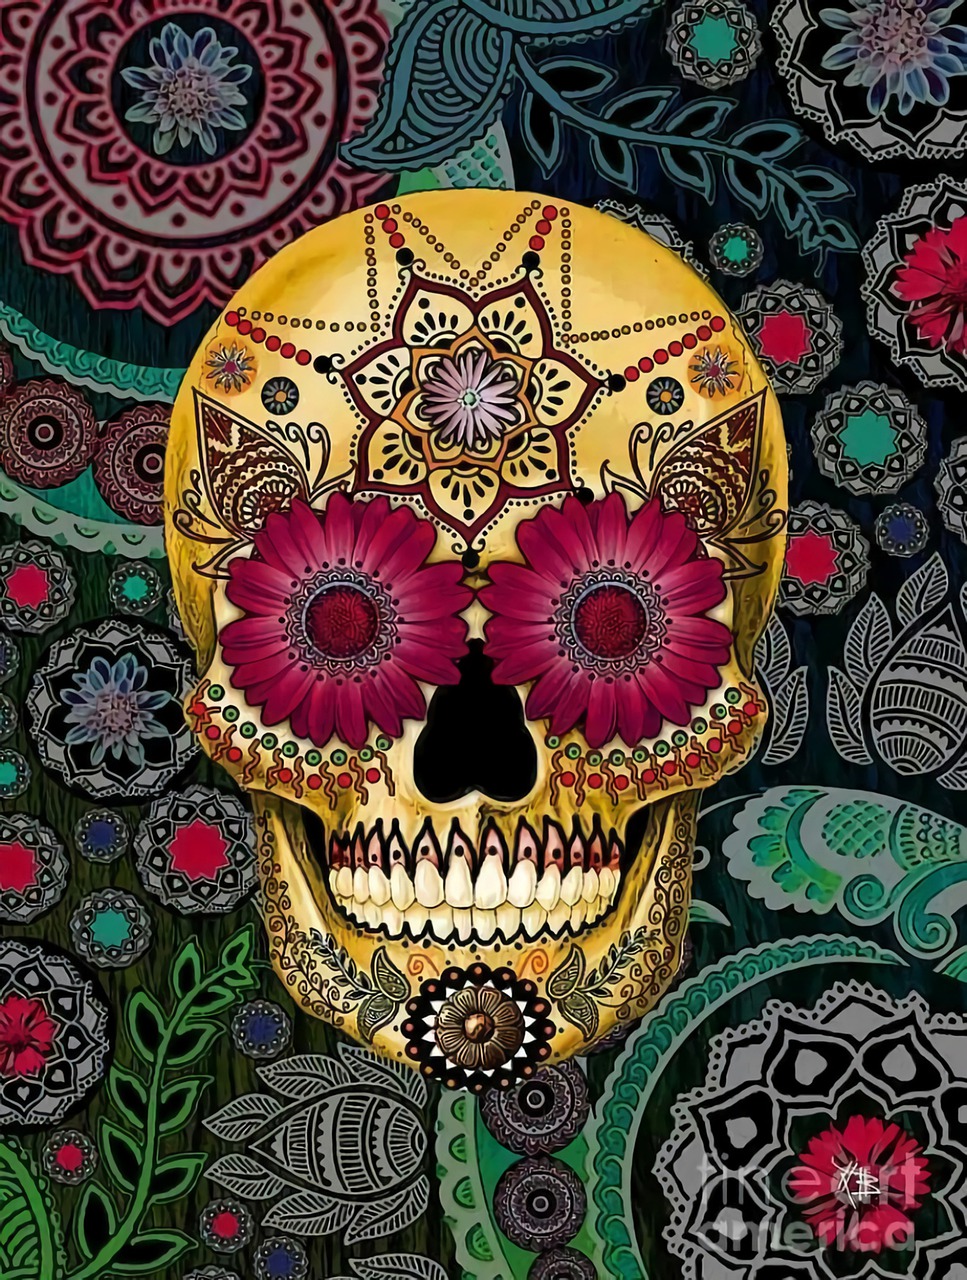 Day of the dead, party, celebration, deceased, skull - free image from ...